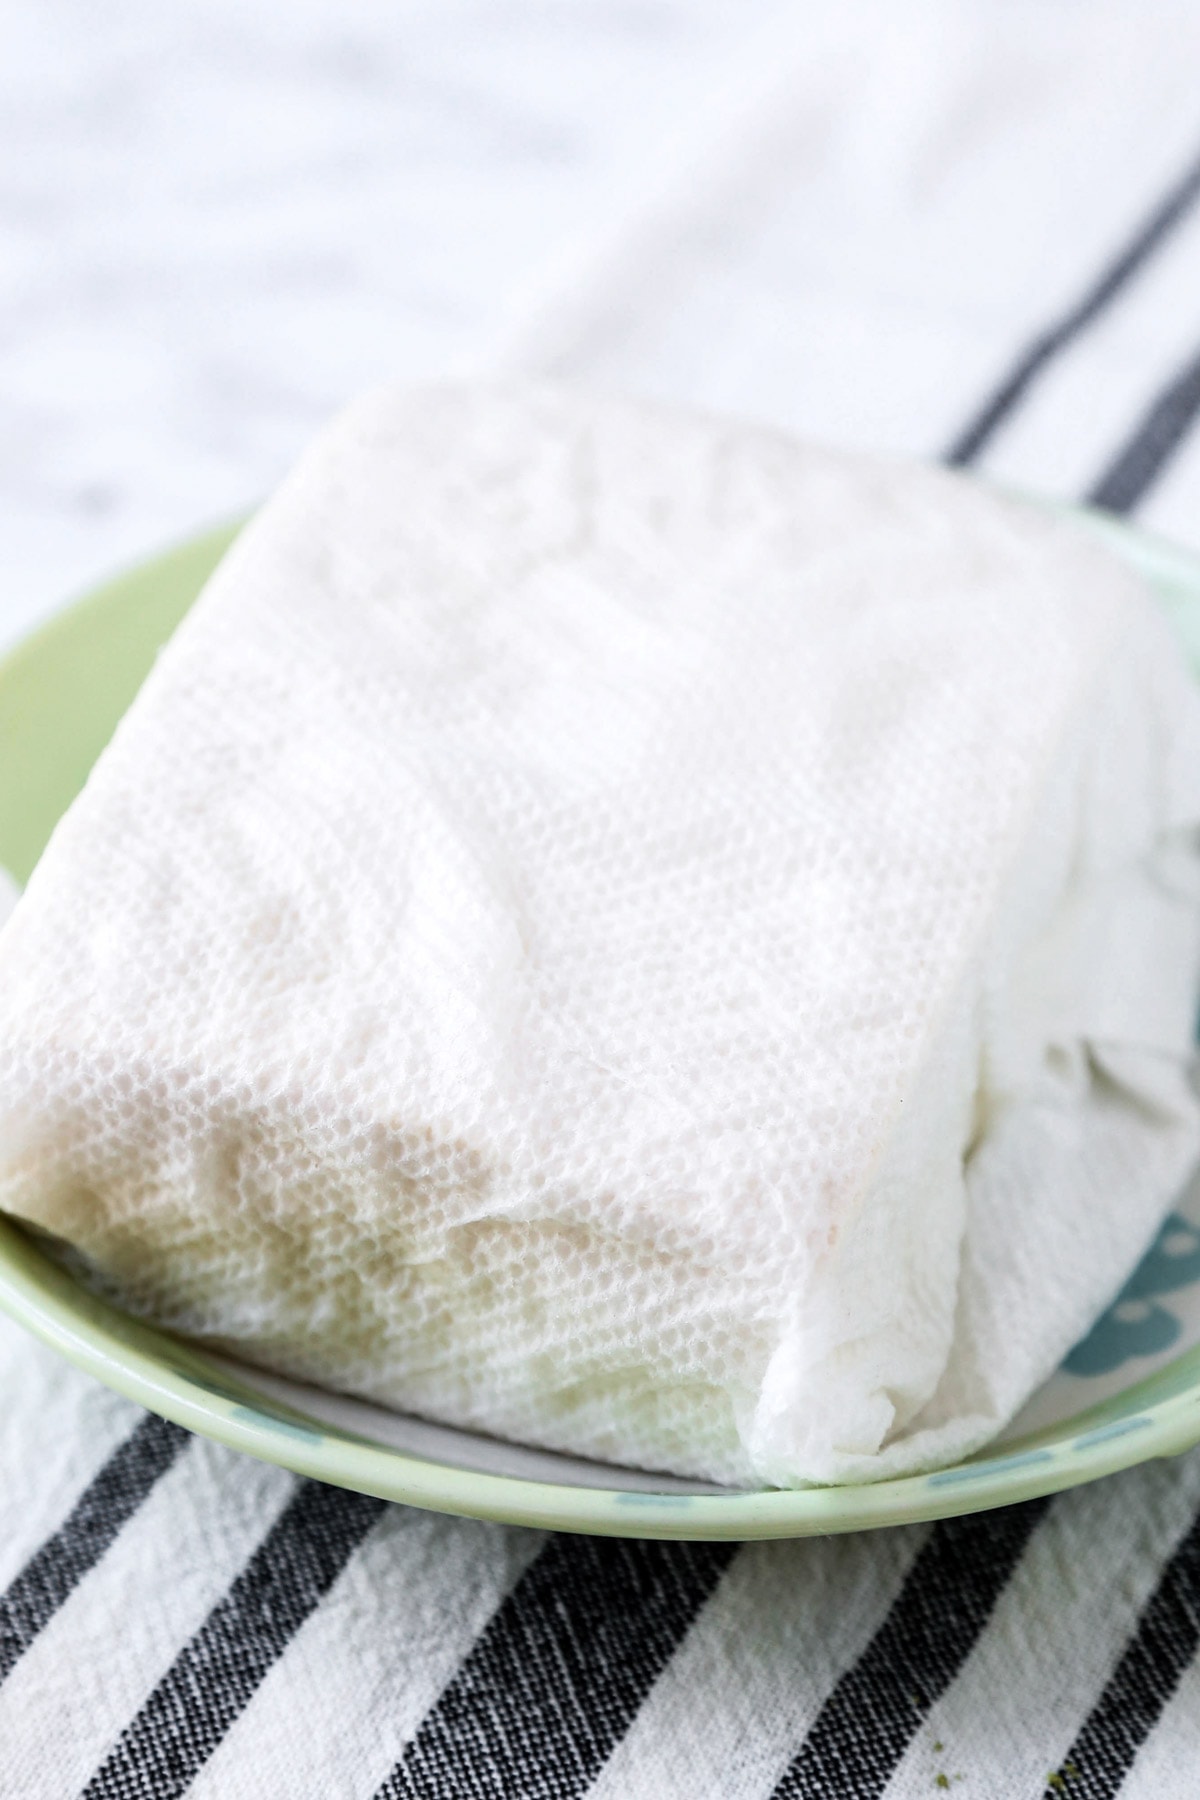 firm tofu wrapped in paper towel